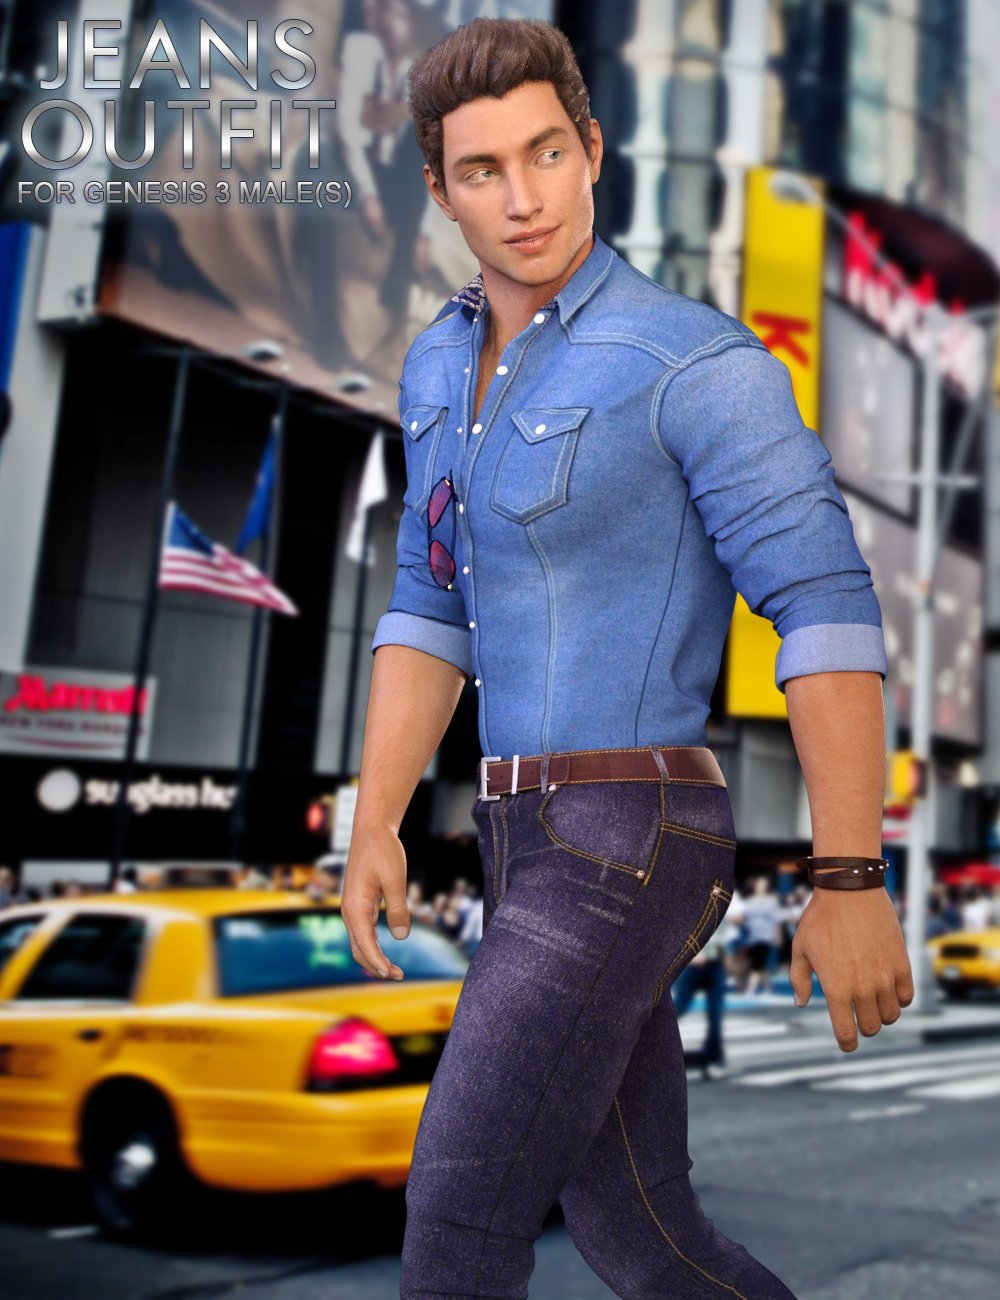 Jeans Outfit for Genesis 3 Male(s) by: Blue Rabbit, 3D Models by Daz 3D